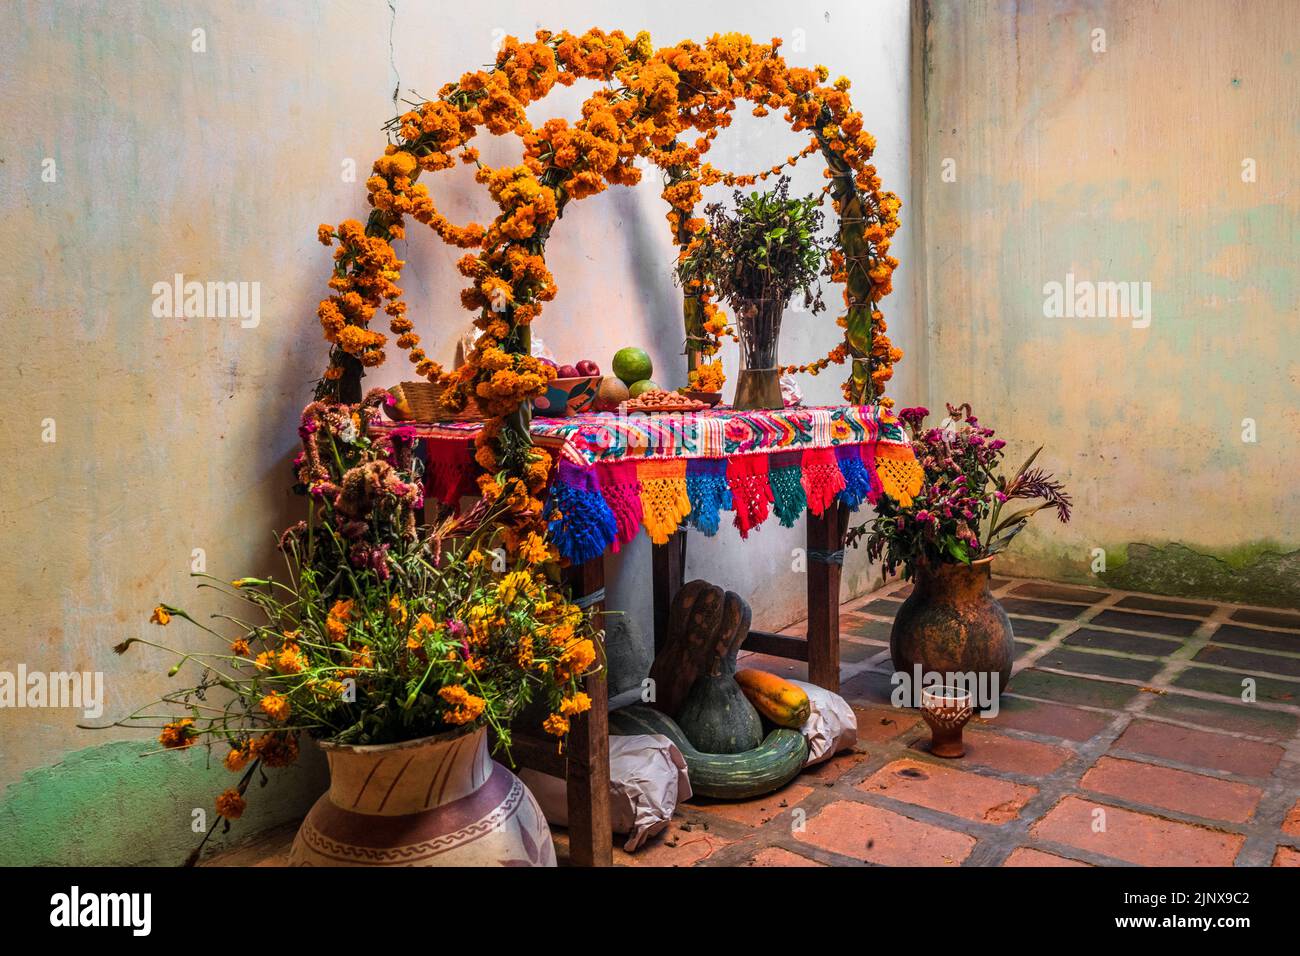 An altar of the dead (Altar de Muertos) is placed inside a house during the Day of the Dead celebrations in Xochistlahuaca, Guerrero, Mexico. Stock Photo